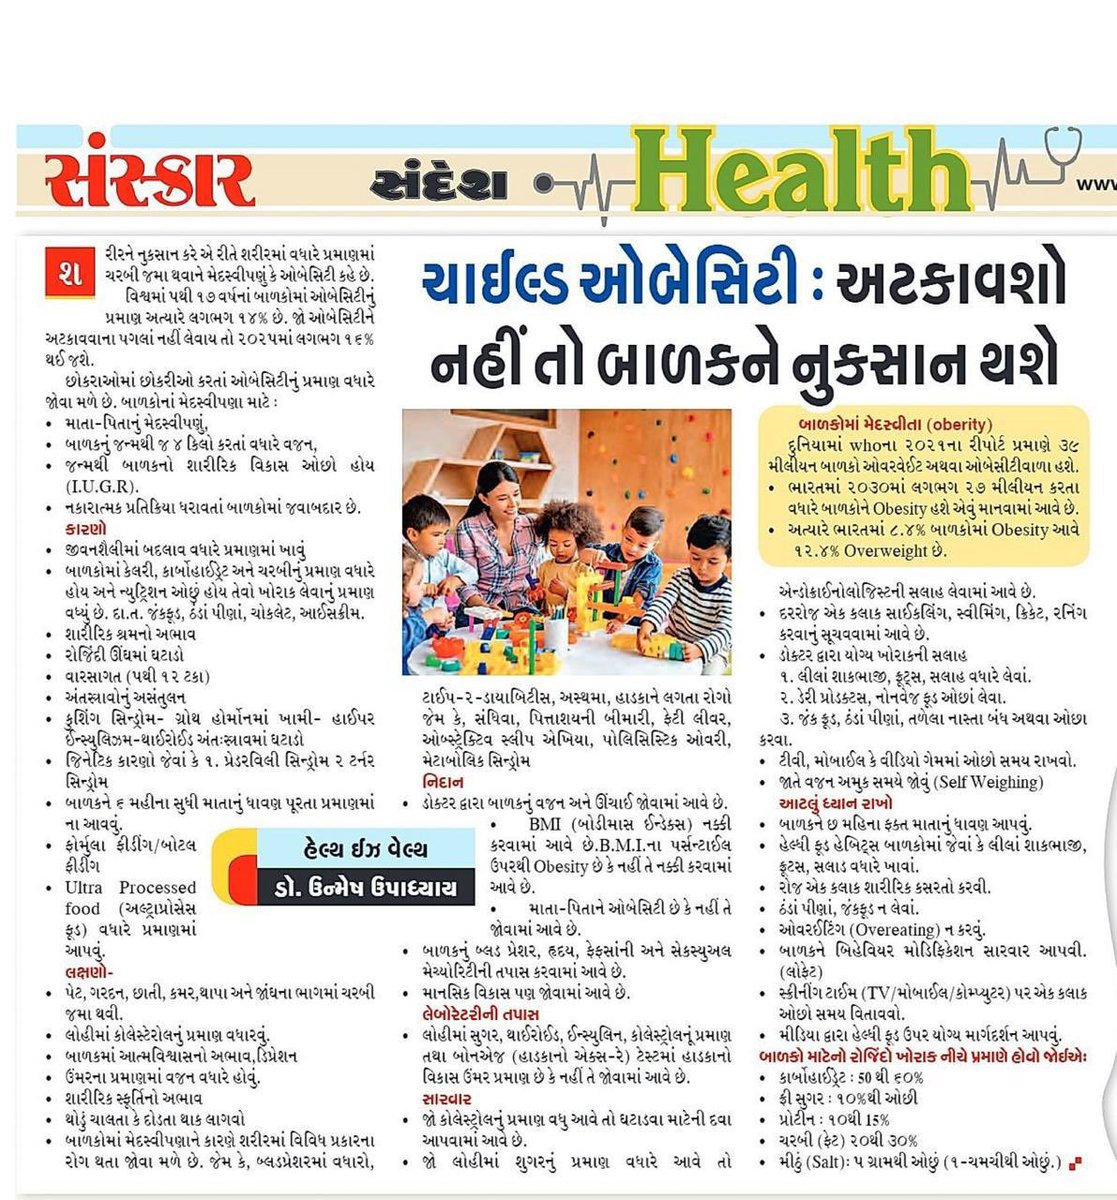 My #article about #obesity in #child & prevention in today’s Sandesh newspaper #IAPkibaatcommunitkesath #parents